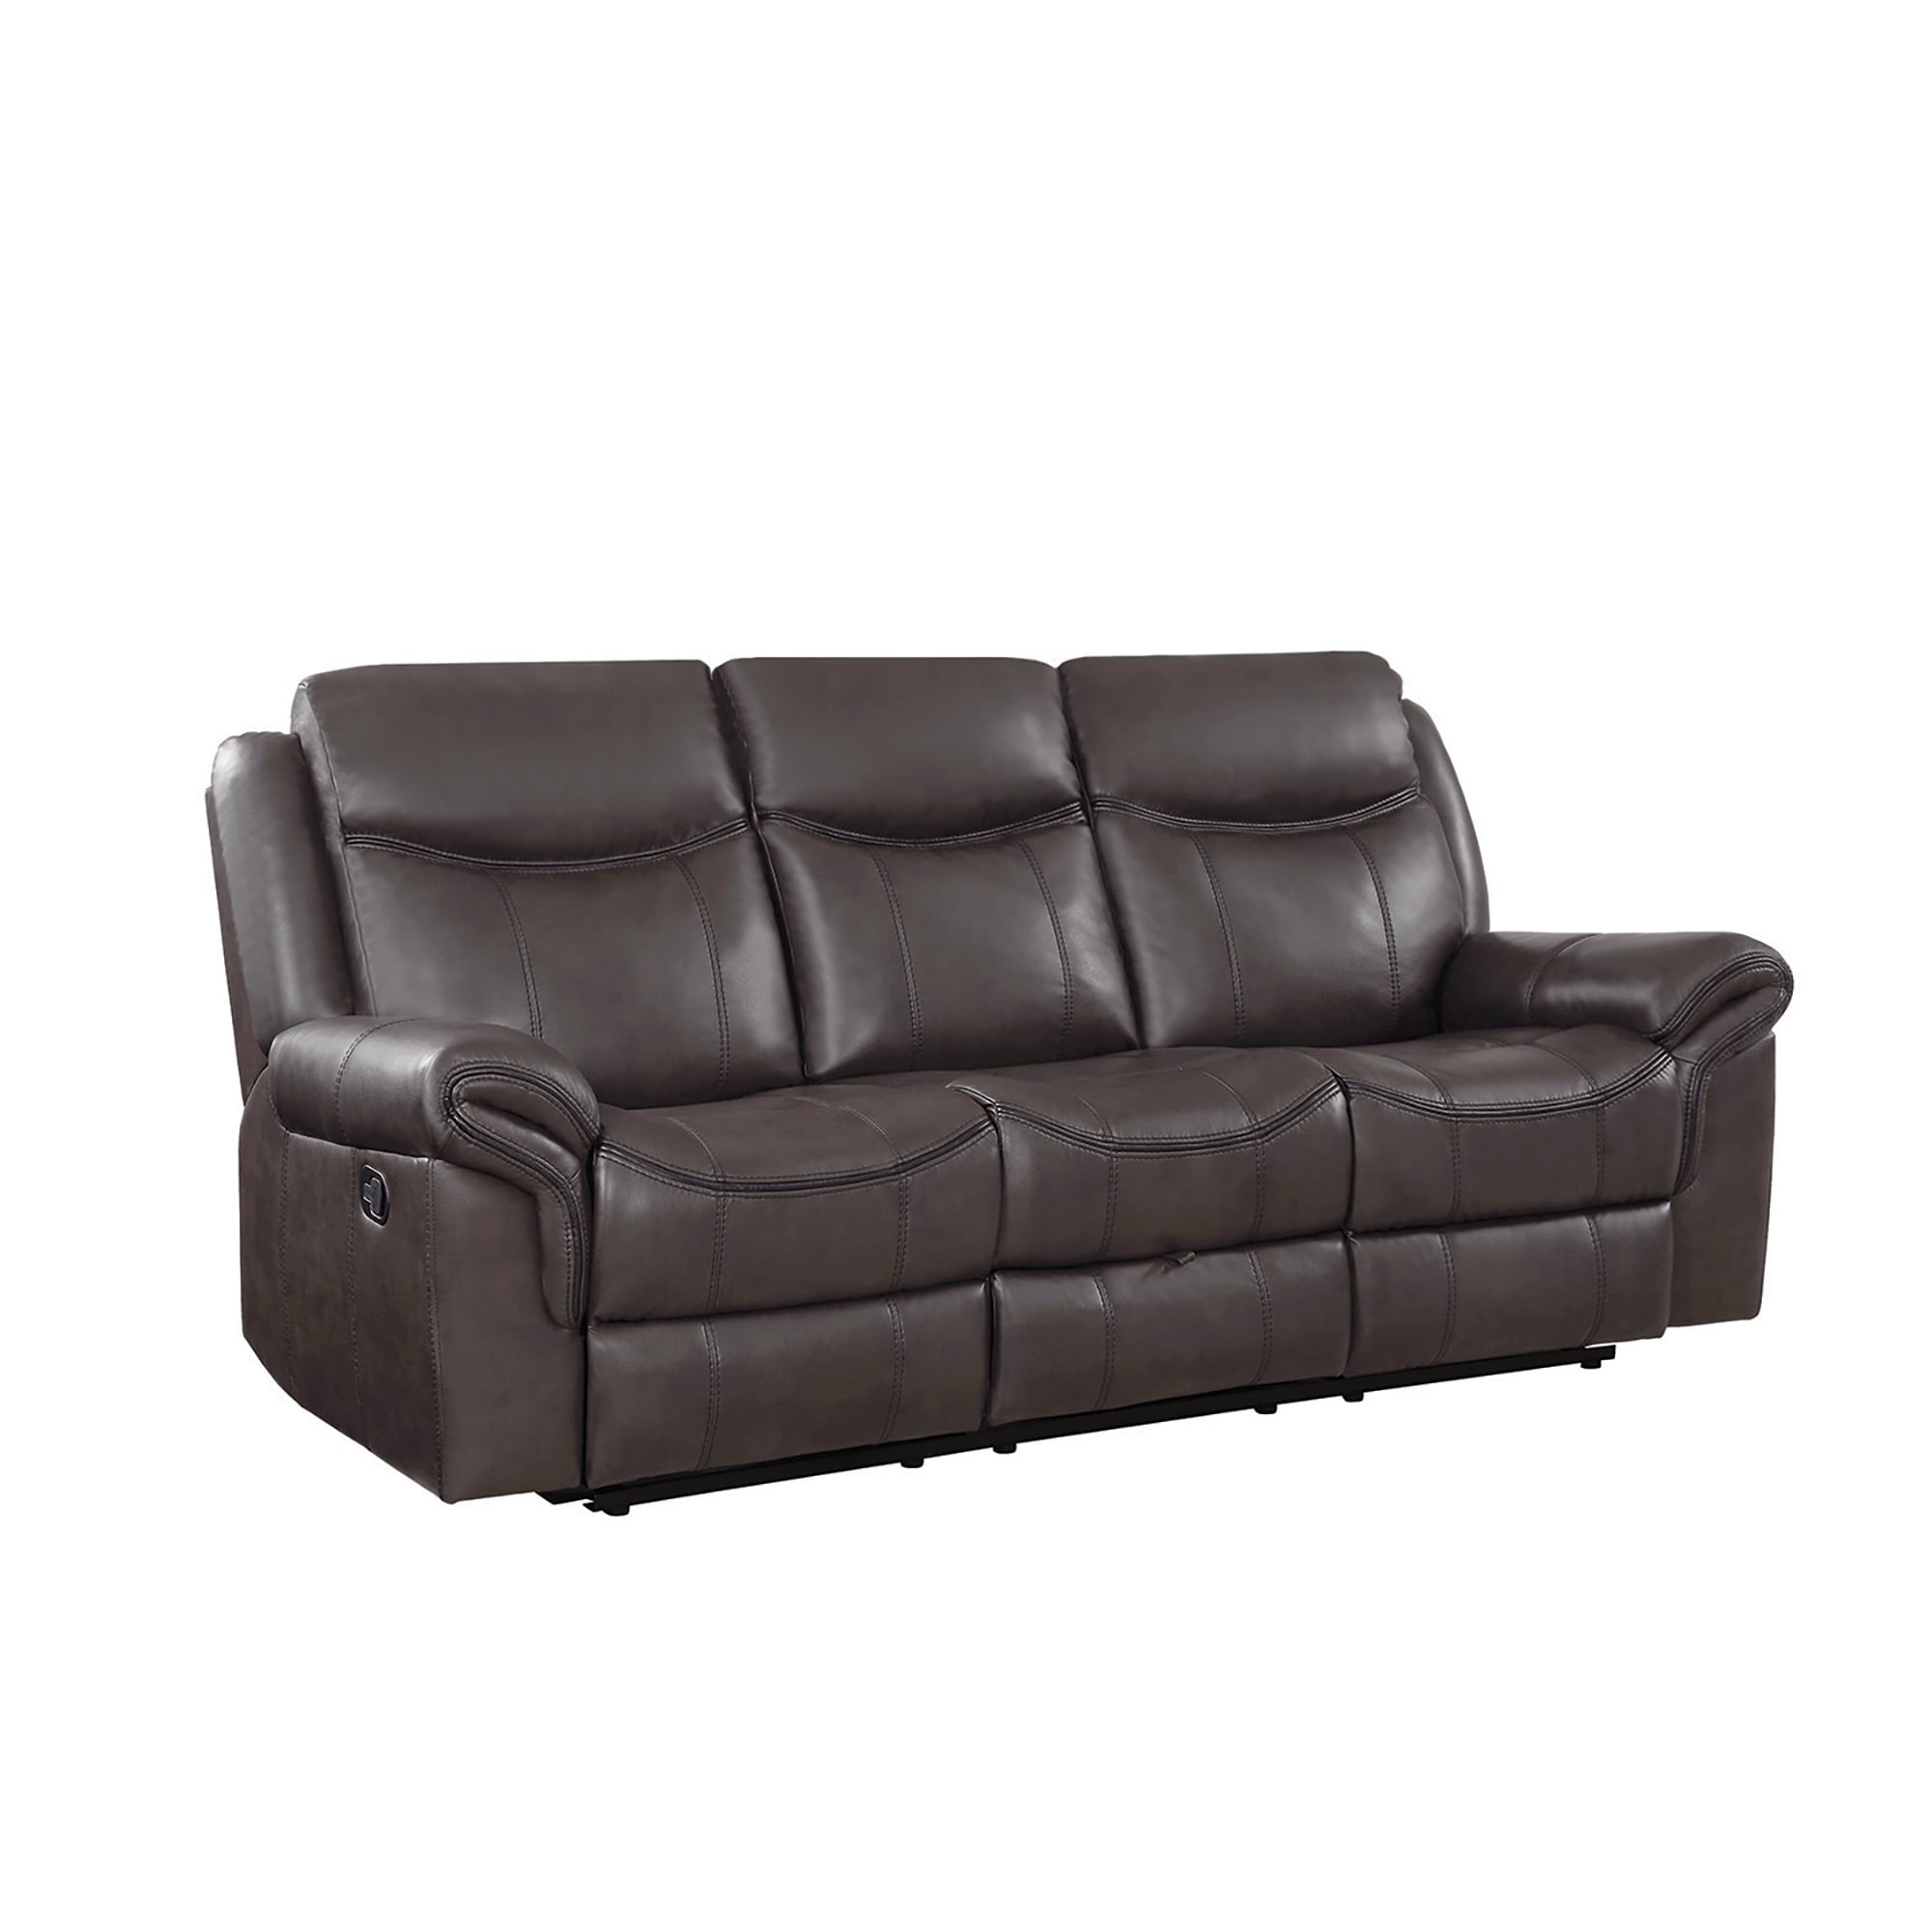 CDecor Melrose Cocoa Brown Leatherette Upholstered Motion Sofa